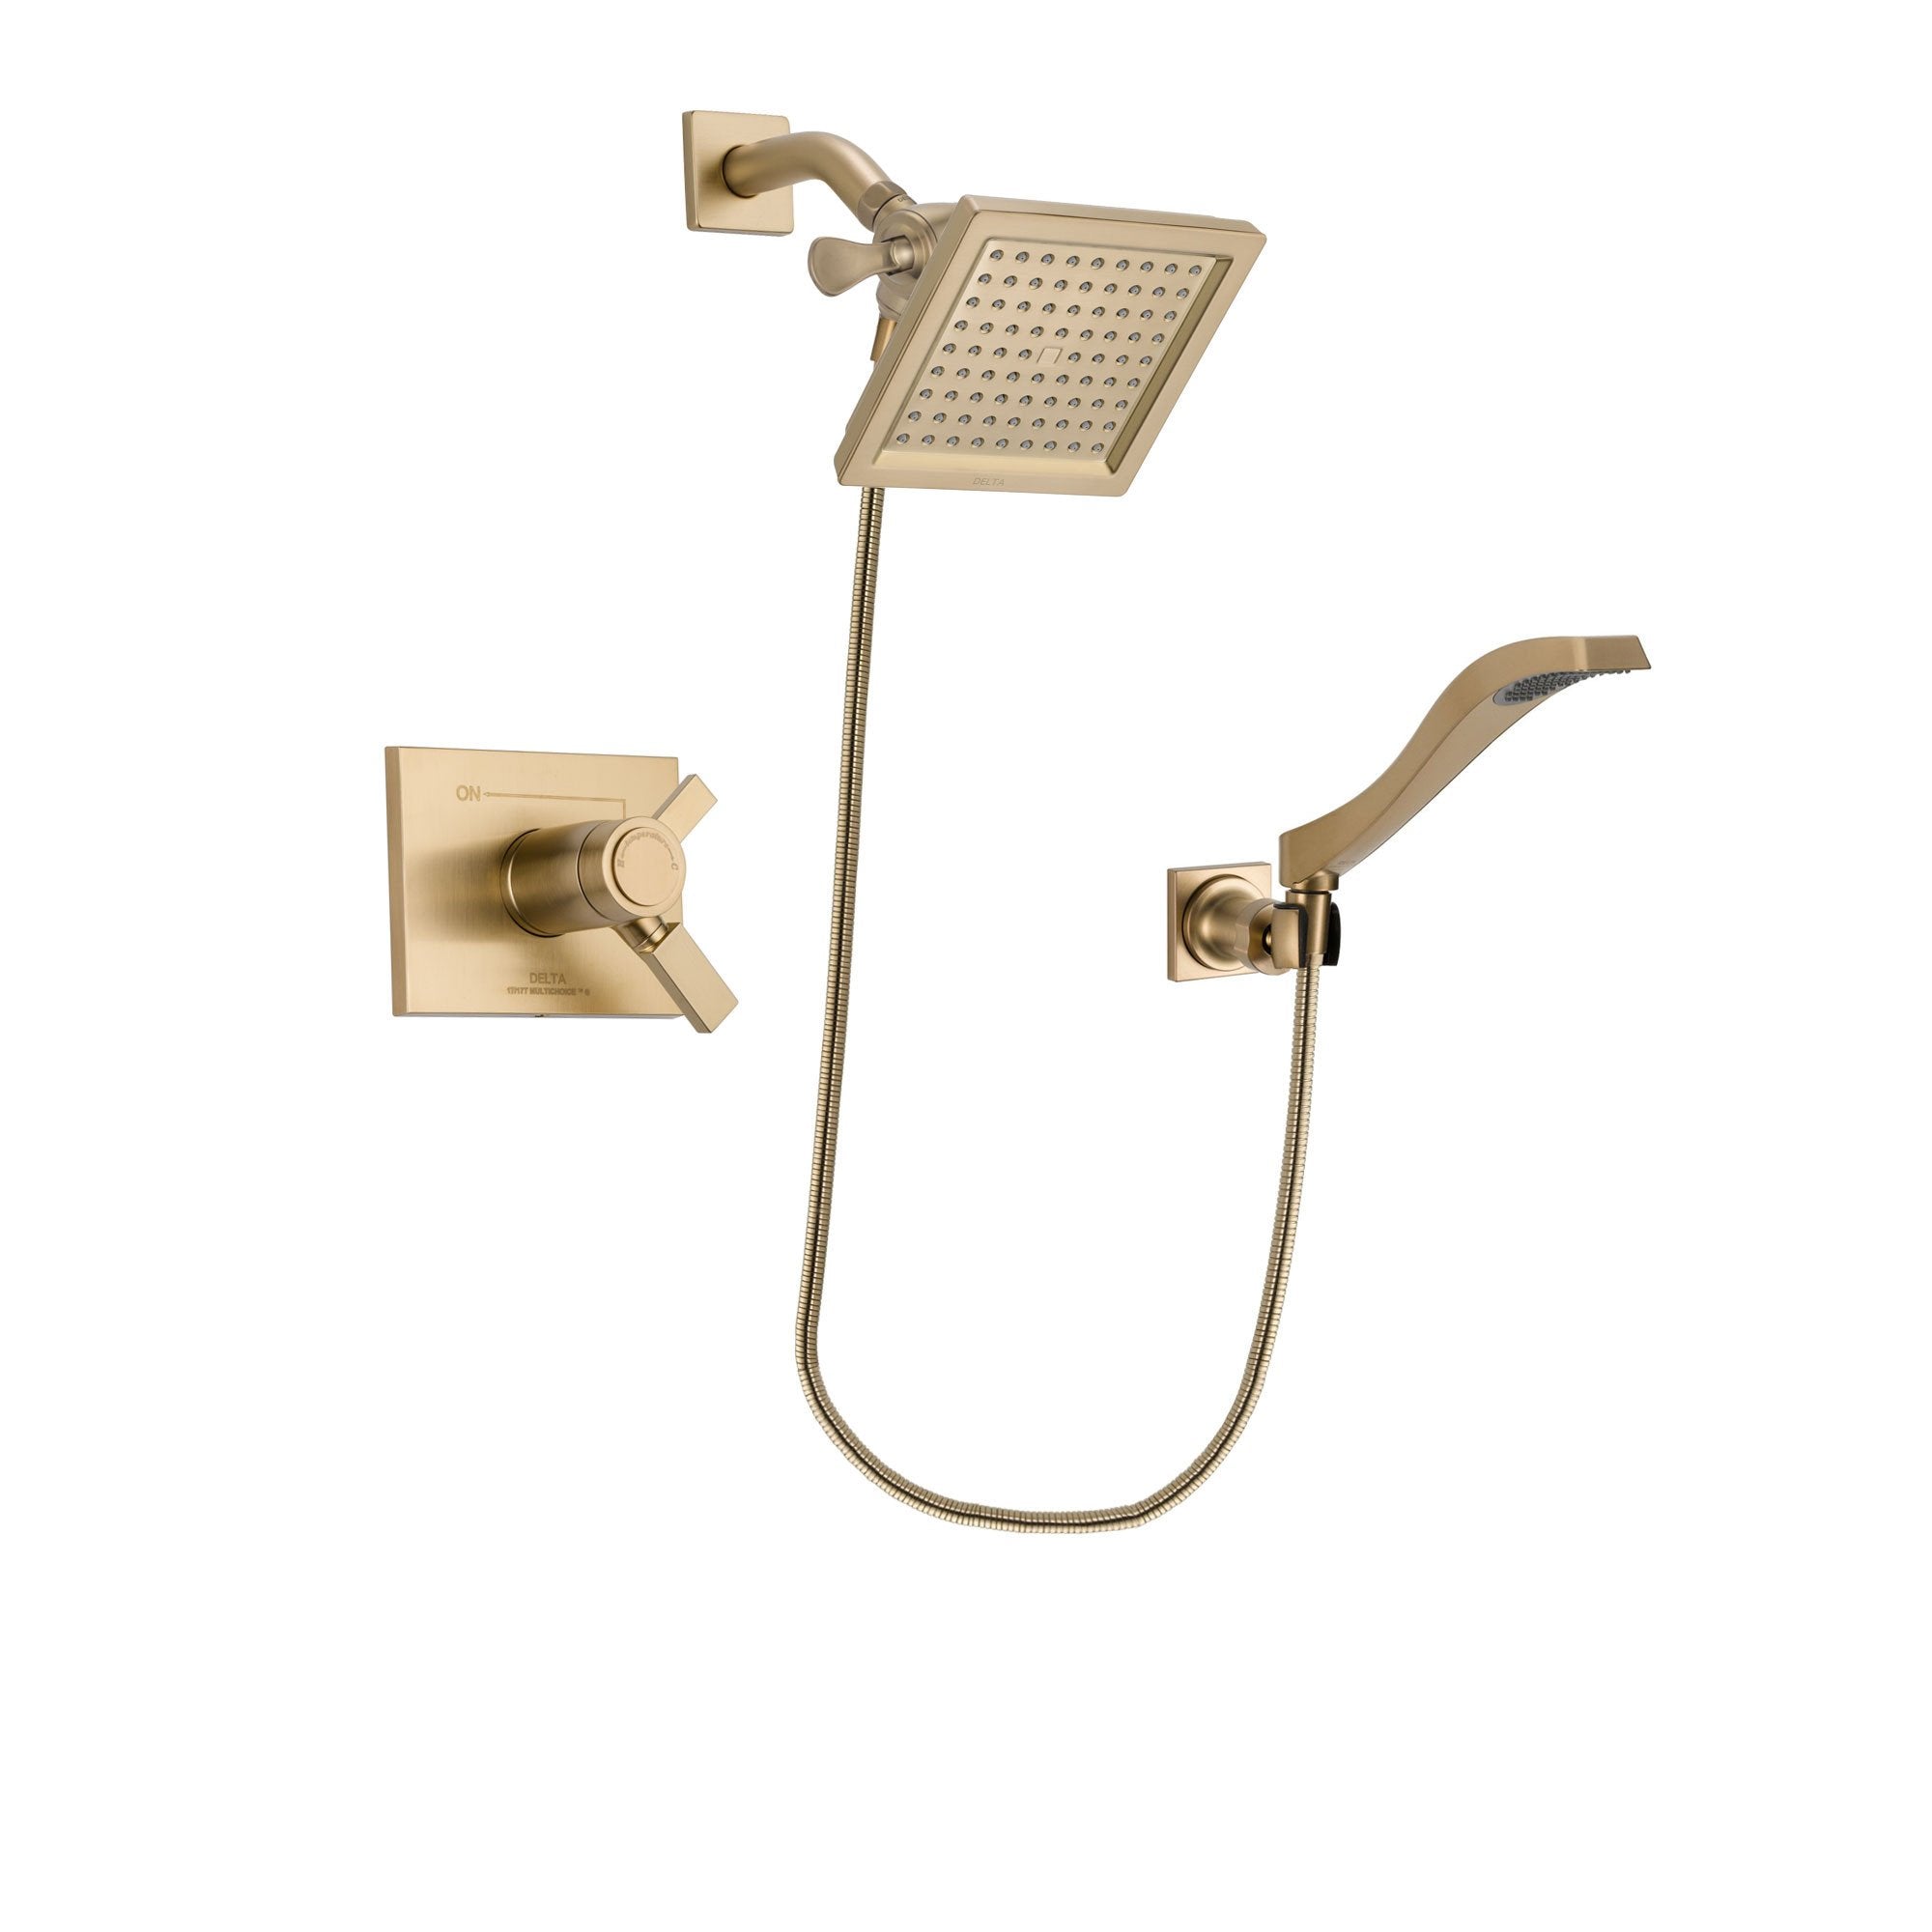 Delta Vero Champagne Bronze Finish Thermostatic Shower Faucet System Package with 6.5-inch Square Rain Showerhead and Modern Wall Mount Handheld Shower Spray Includes Rough-in Valve DSP3852V